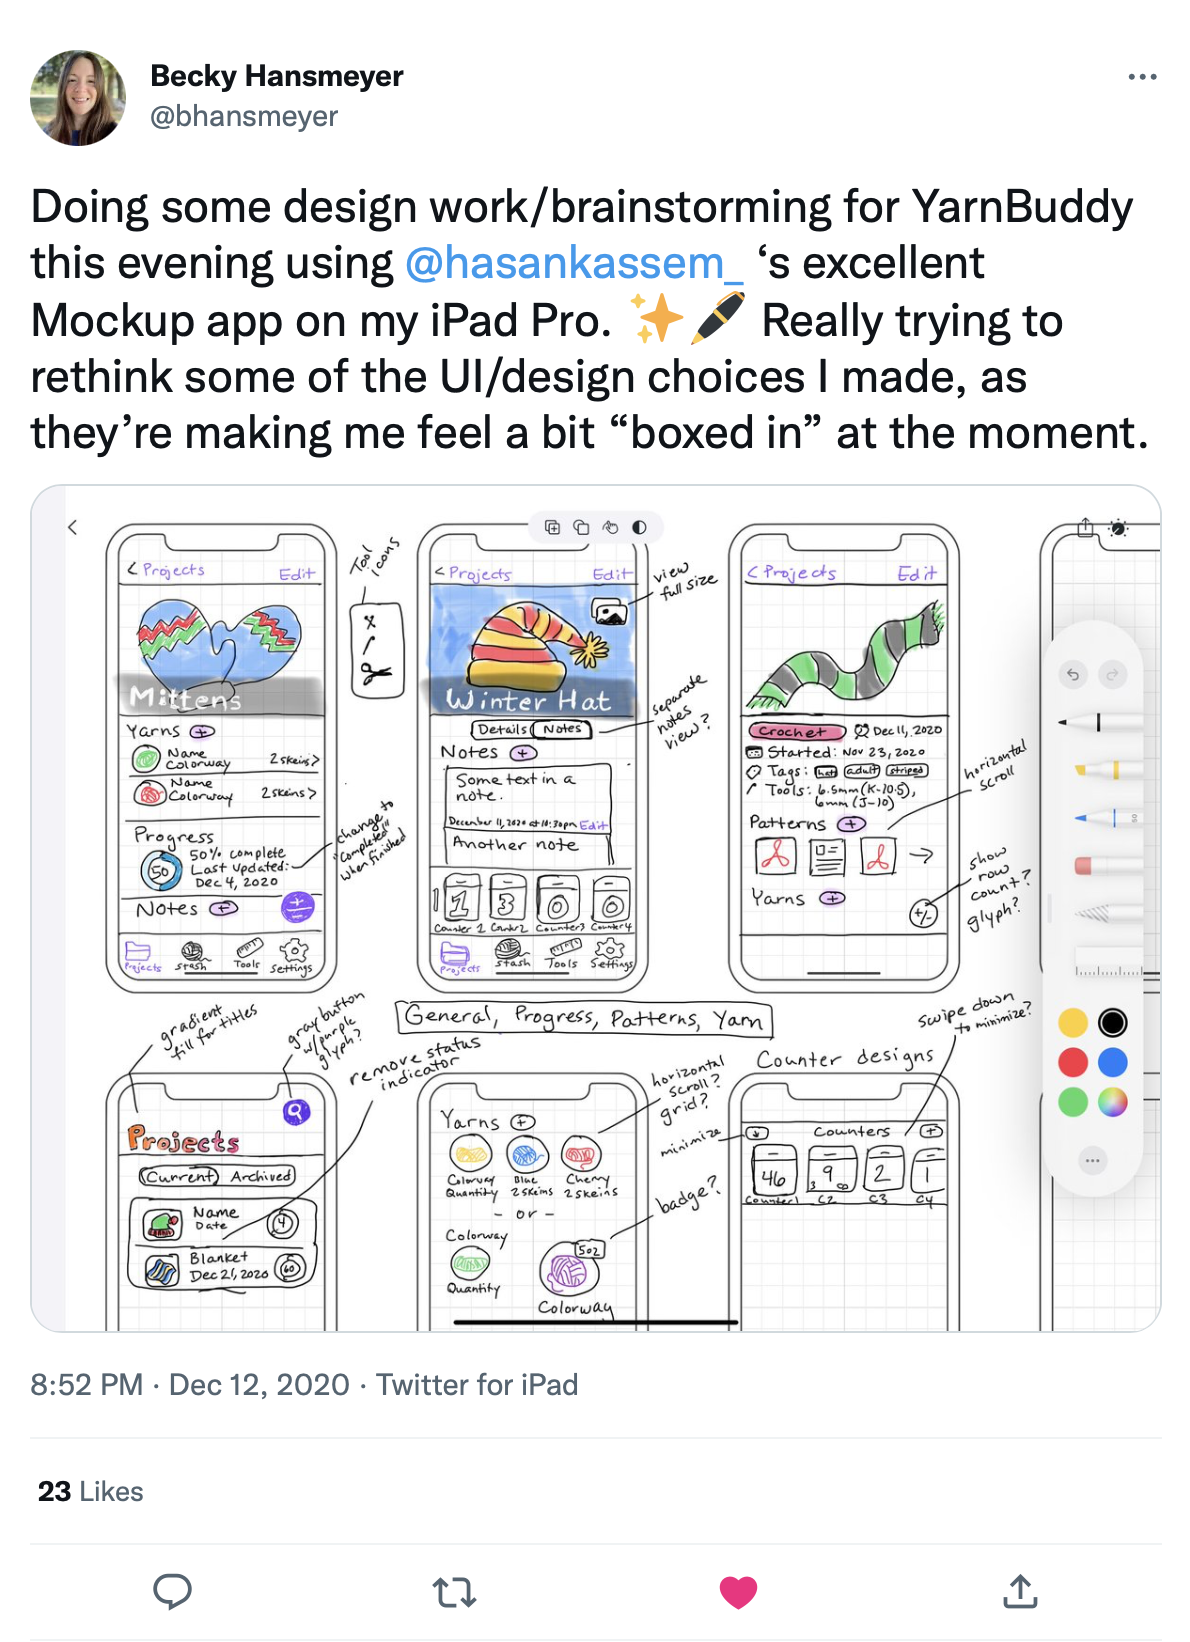 Becky Hansmeyer’s tweet about protoyping with Mockup